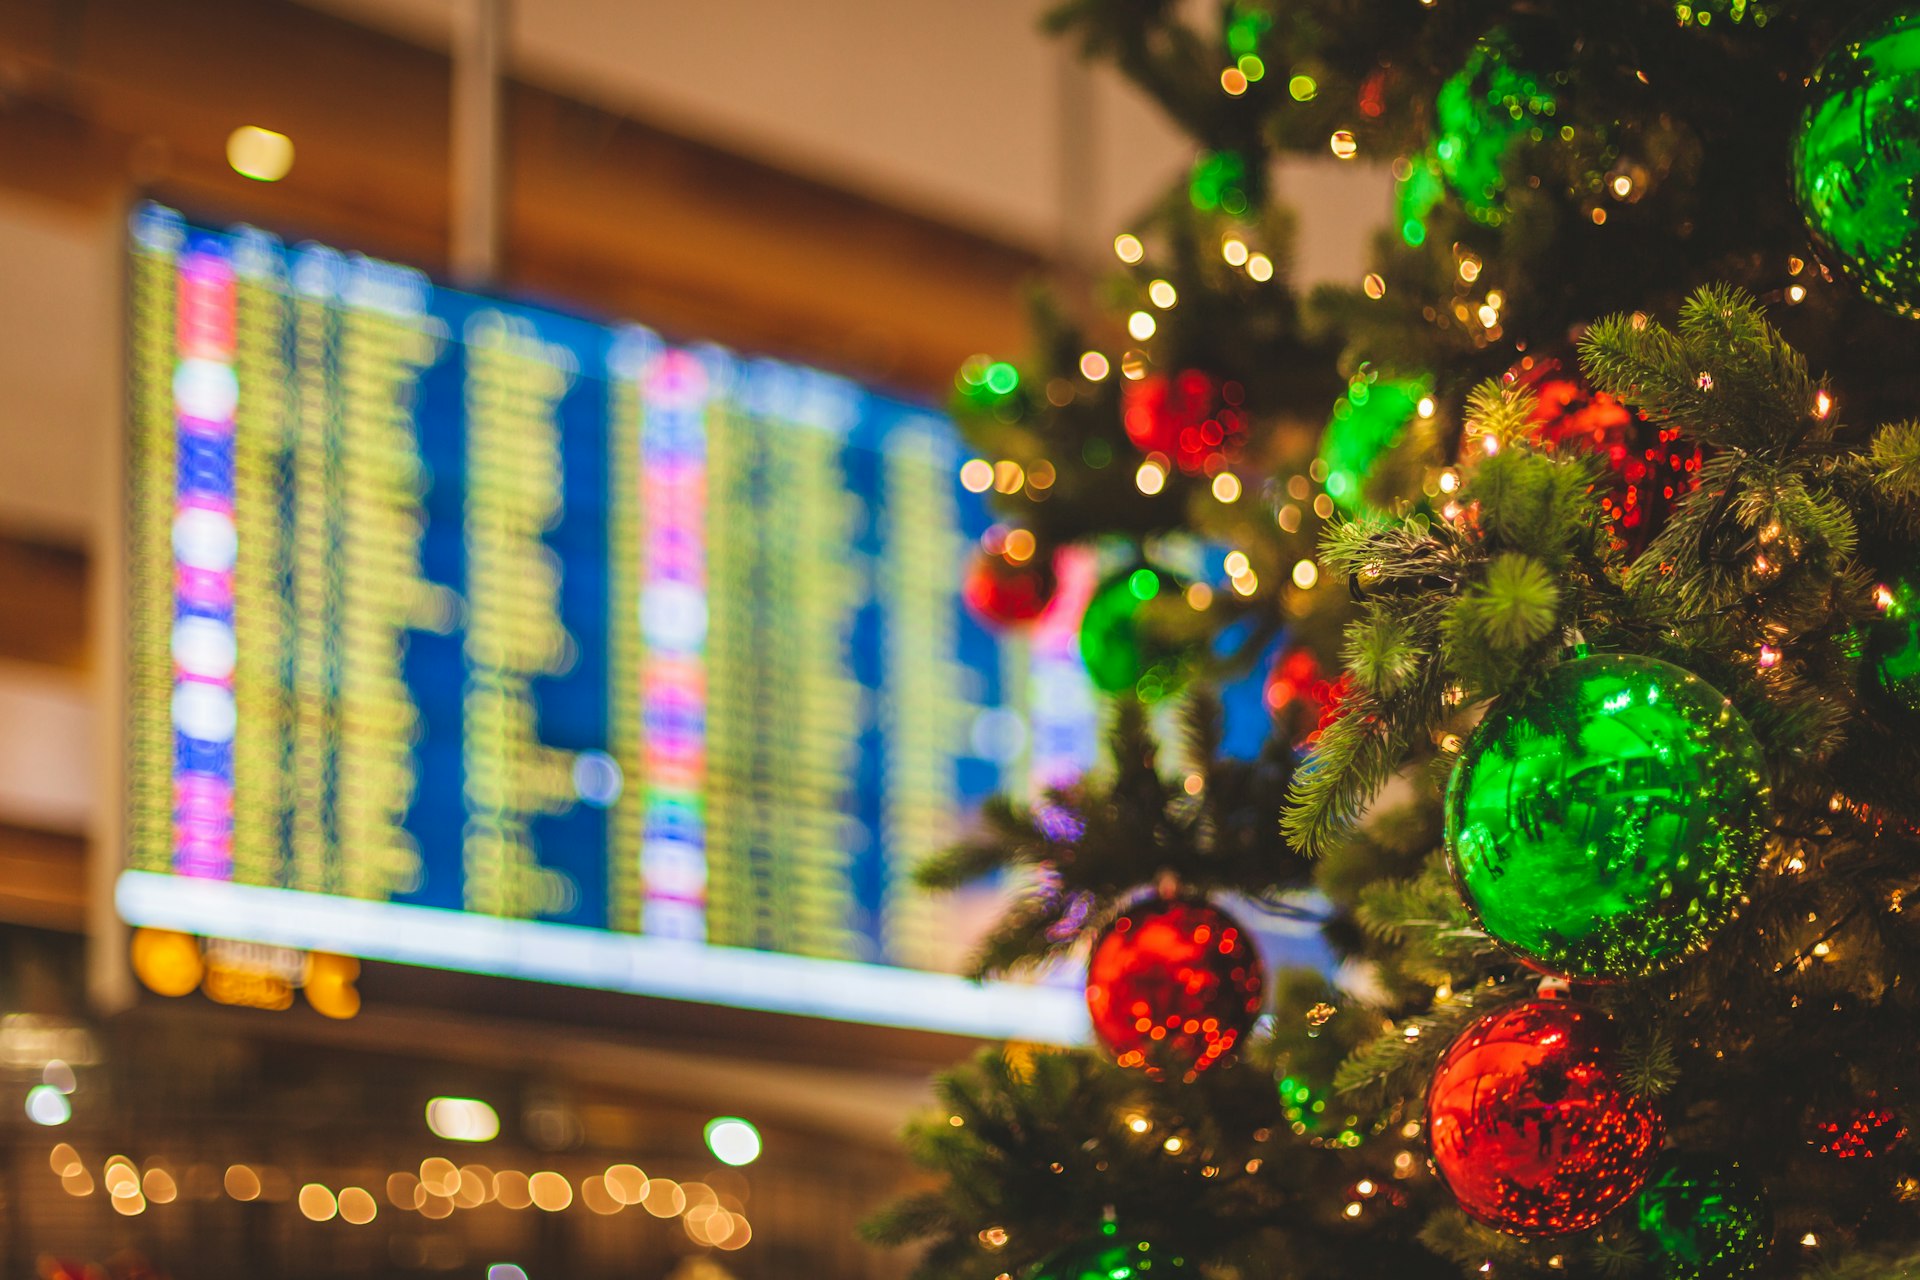 A decorated Christmas tree with a flight departures display in the background